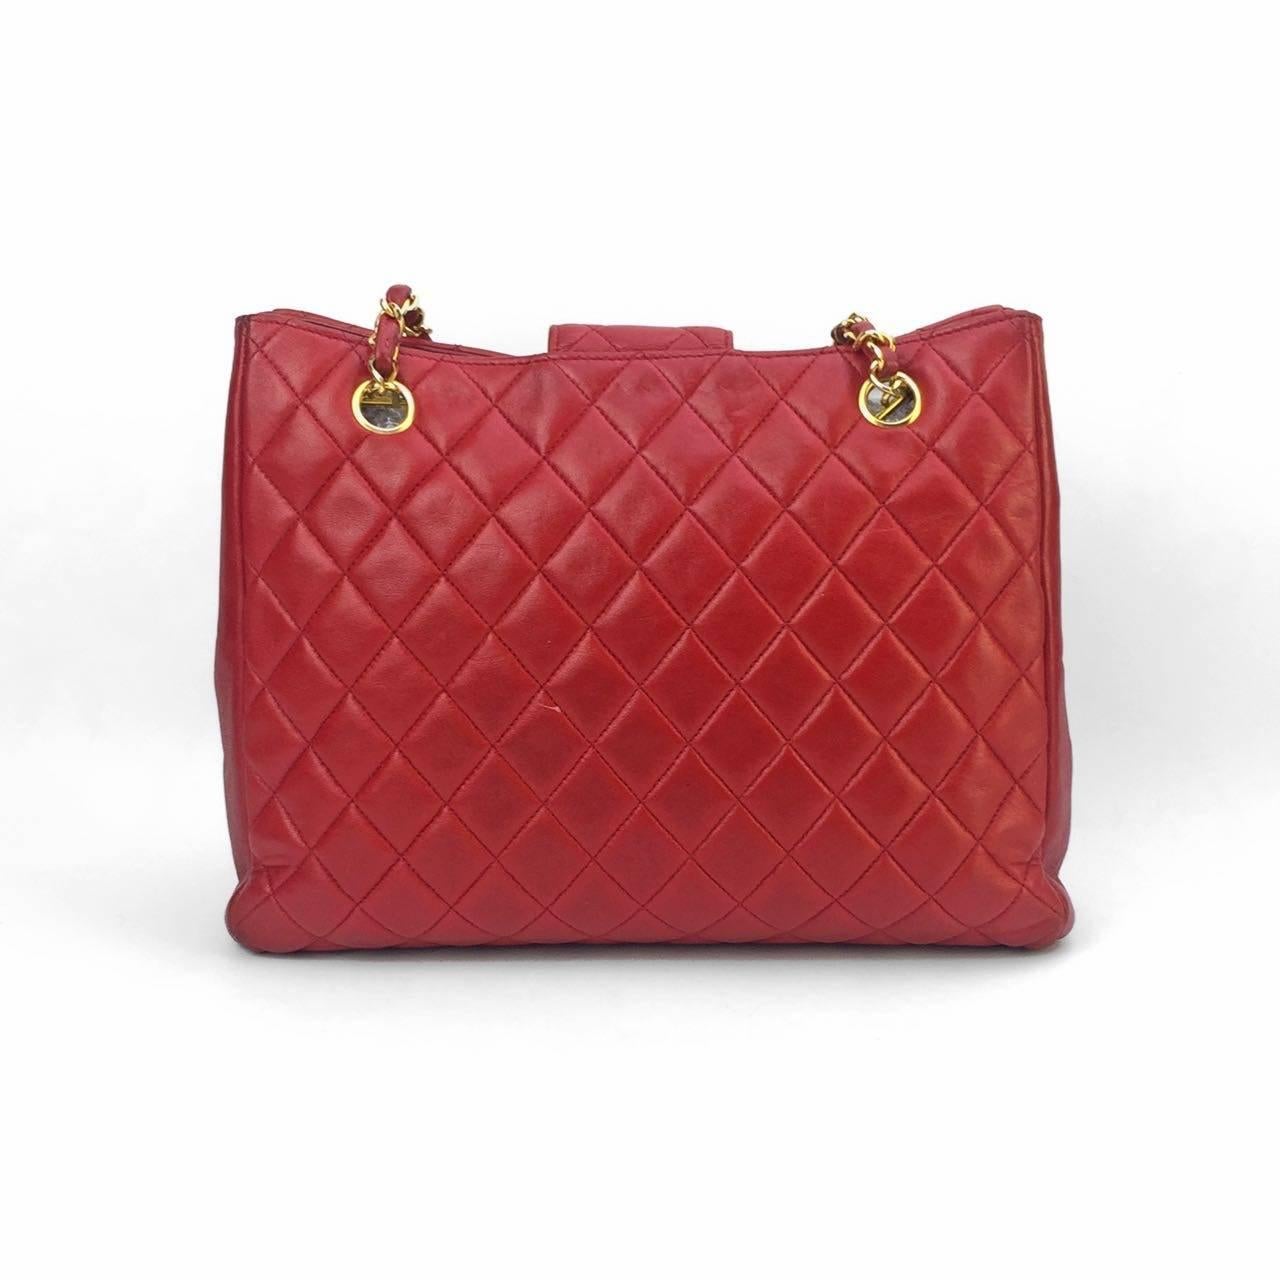 - Vintage 90s Chanel classic red quilted lambskin leather gold chain strap shoulder bag.  Featuring small flap with Gold 